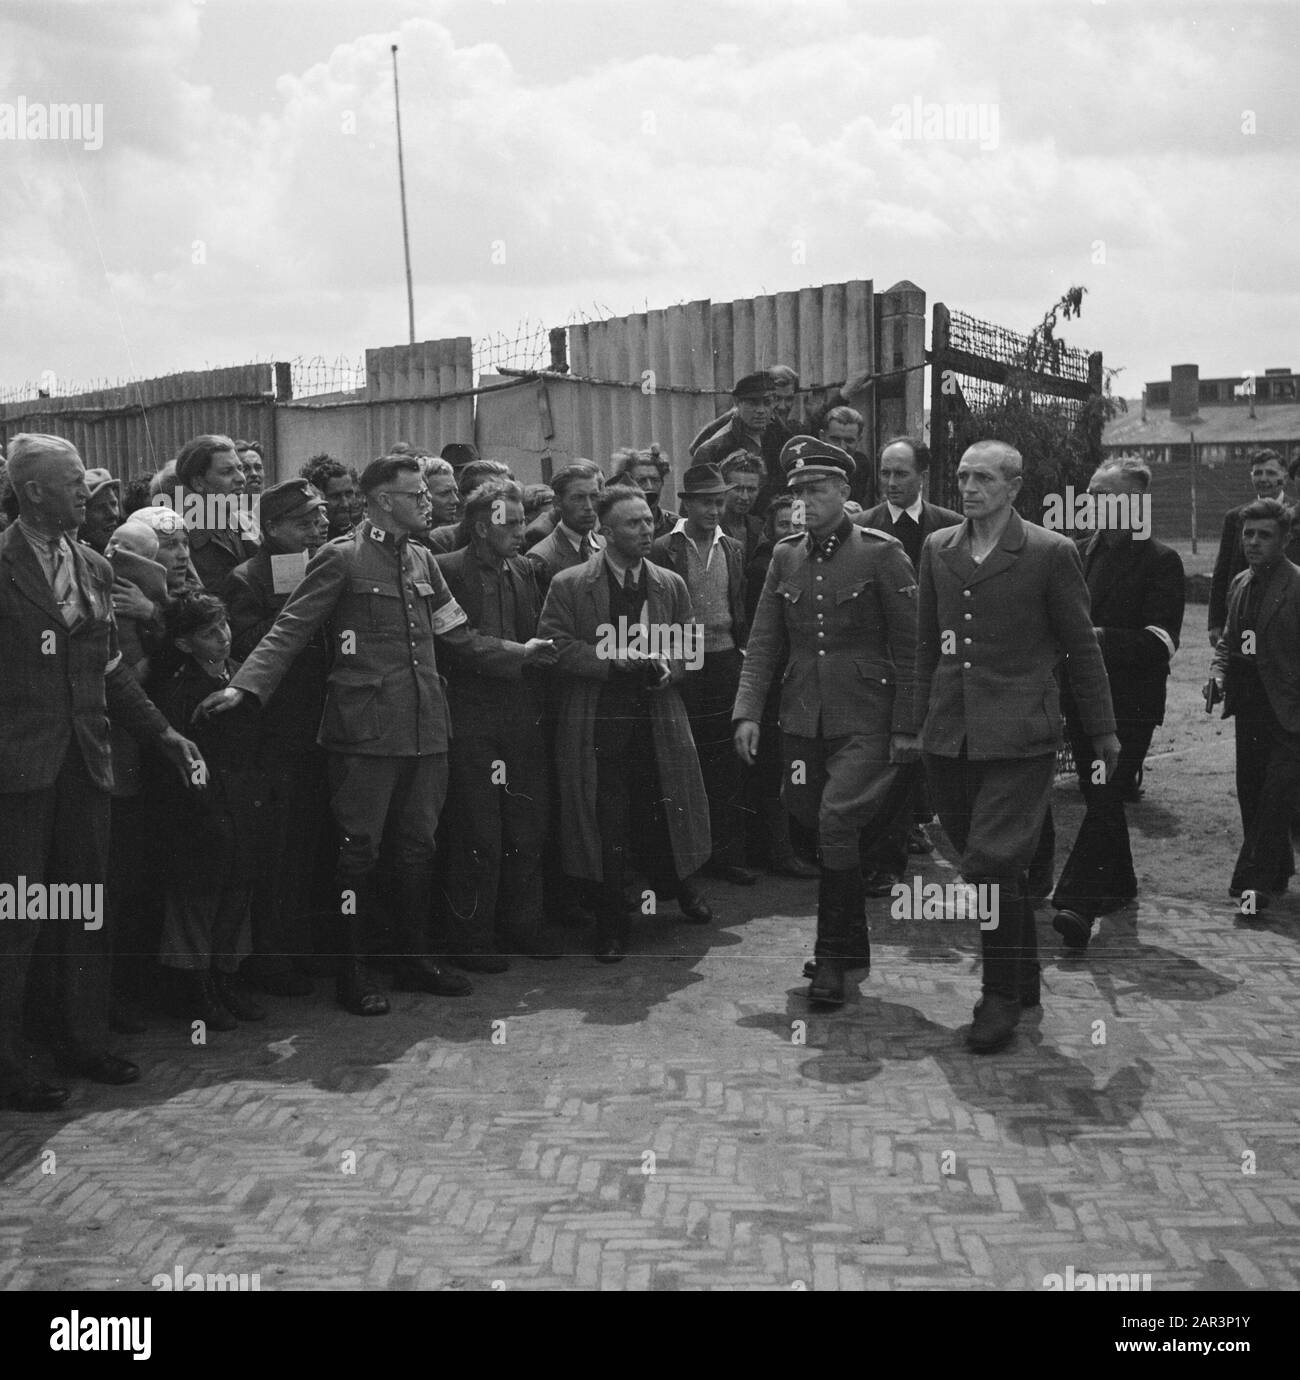 Camp Amersfoort, internment camp for war criminals and collaborators  SS camp guard B.J. Westerveld (right) and camp commander K.P. Berg walk past a crowd Annotation: Left a woman with a baby. her head a kind of cloth with aviator glasses Date: 1945 Location: Amersfoort Keywords: prisoners, internment camps, war crimes, Second World War Personname: Berg, K.P., Westerveld, B.J. Stock Photo